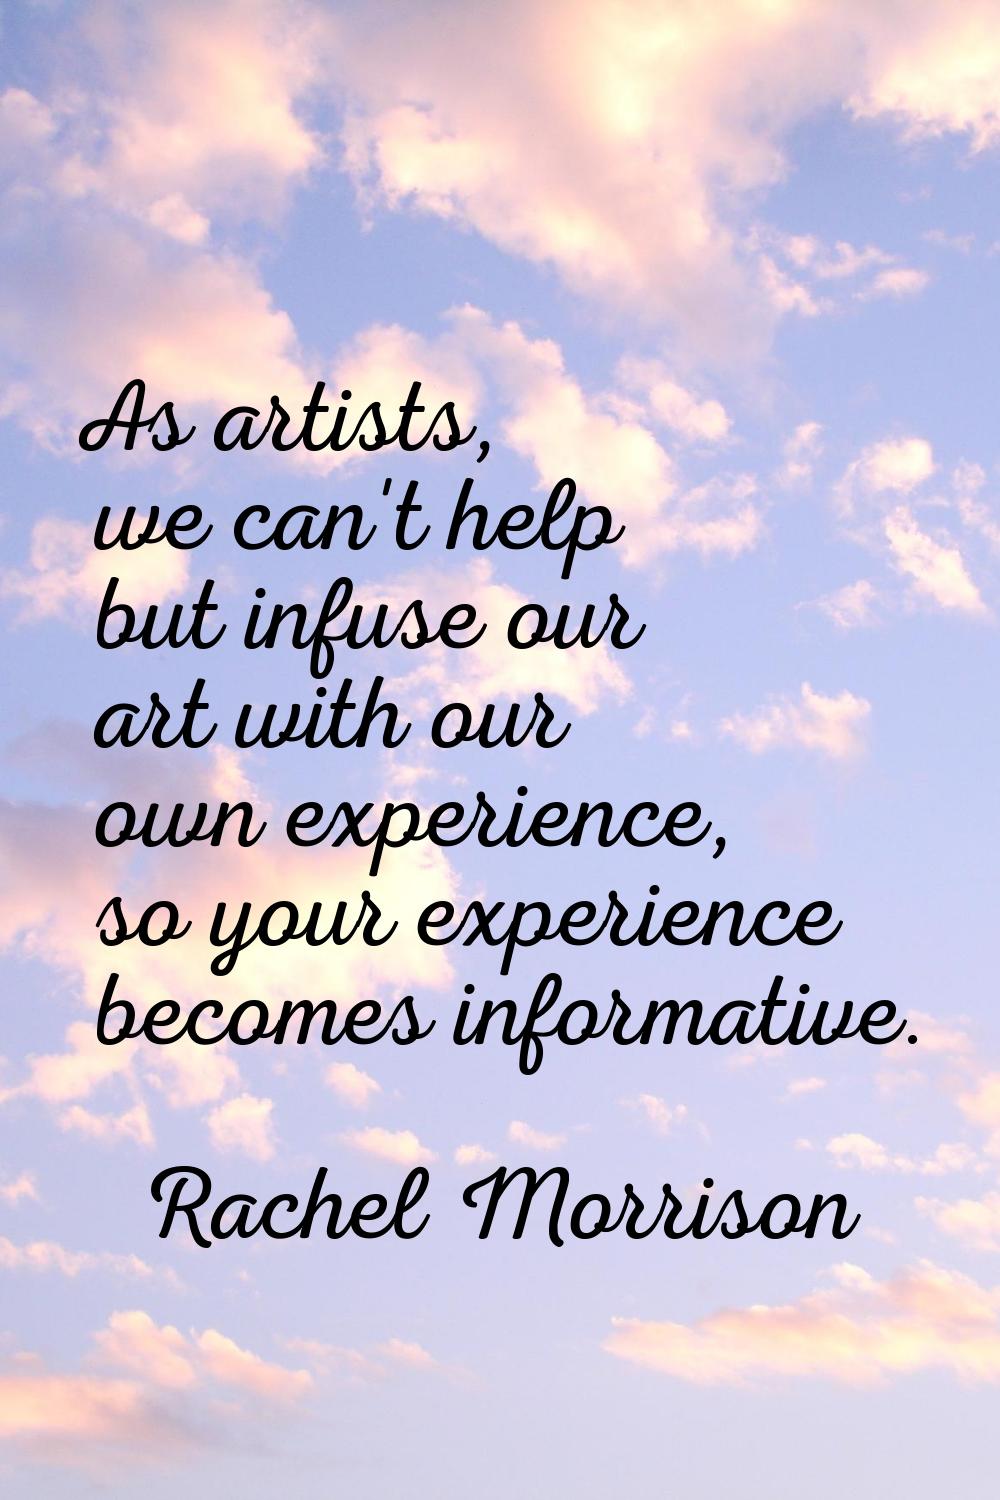 As artists, we can't help but infuse our art with our own experience, so your experience becomes in